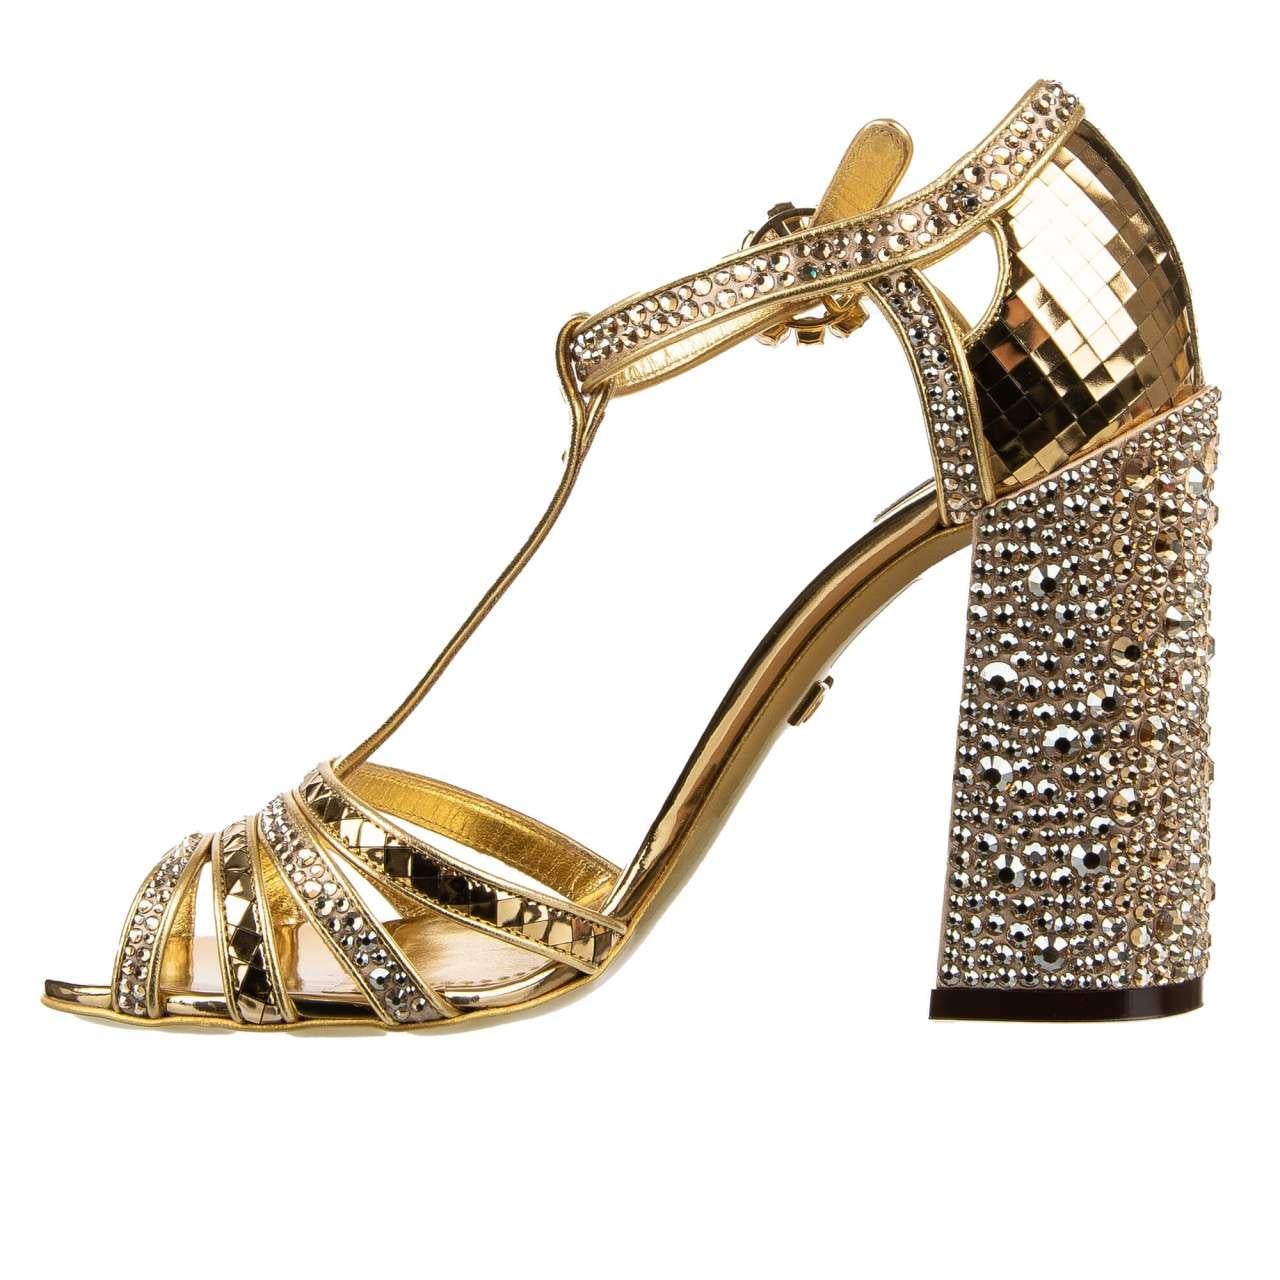 Dolce & Gabbana Disco High Heel Sandals Pumps KEIRA with Crystals Gold 40 10 In Excellent Condition For Sale In Erkrath, DE